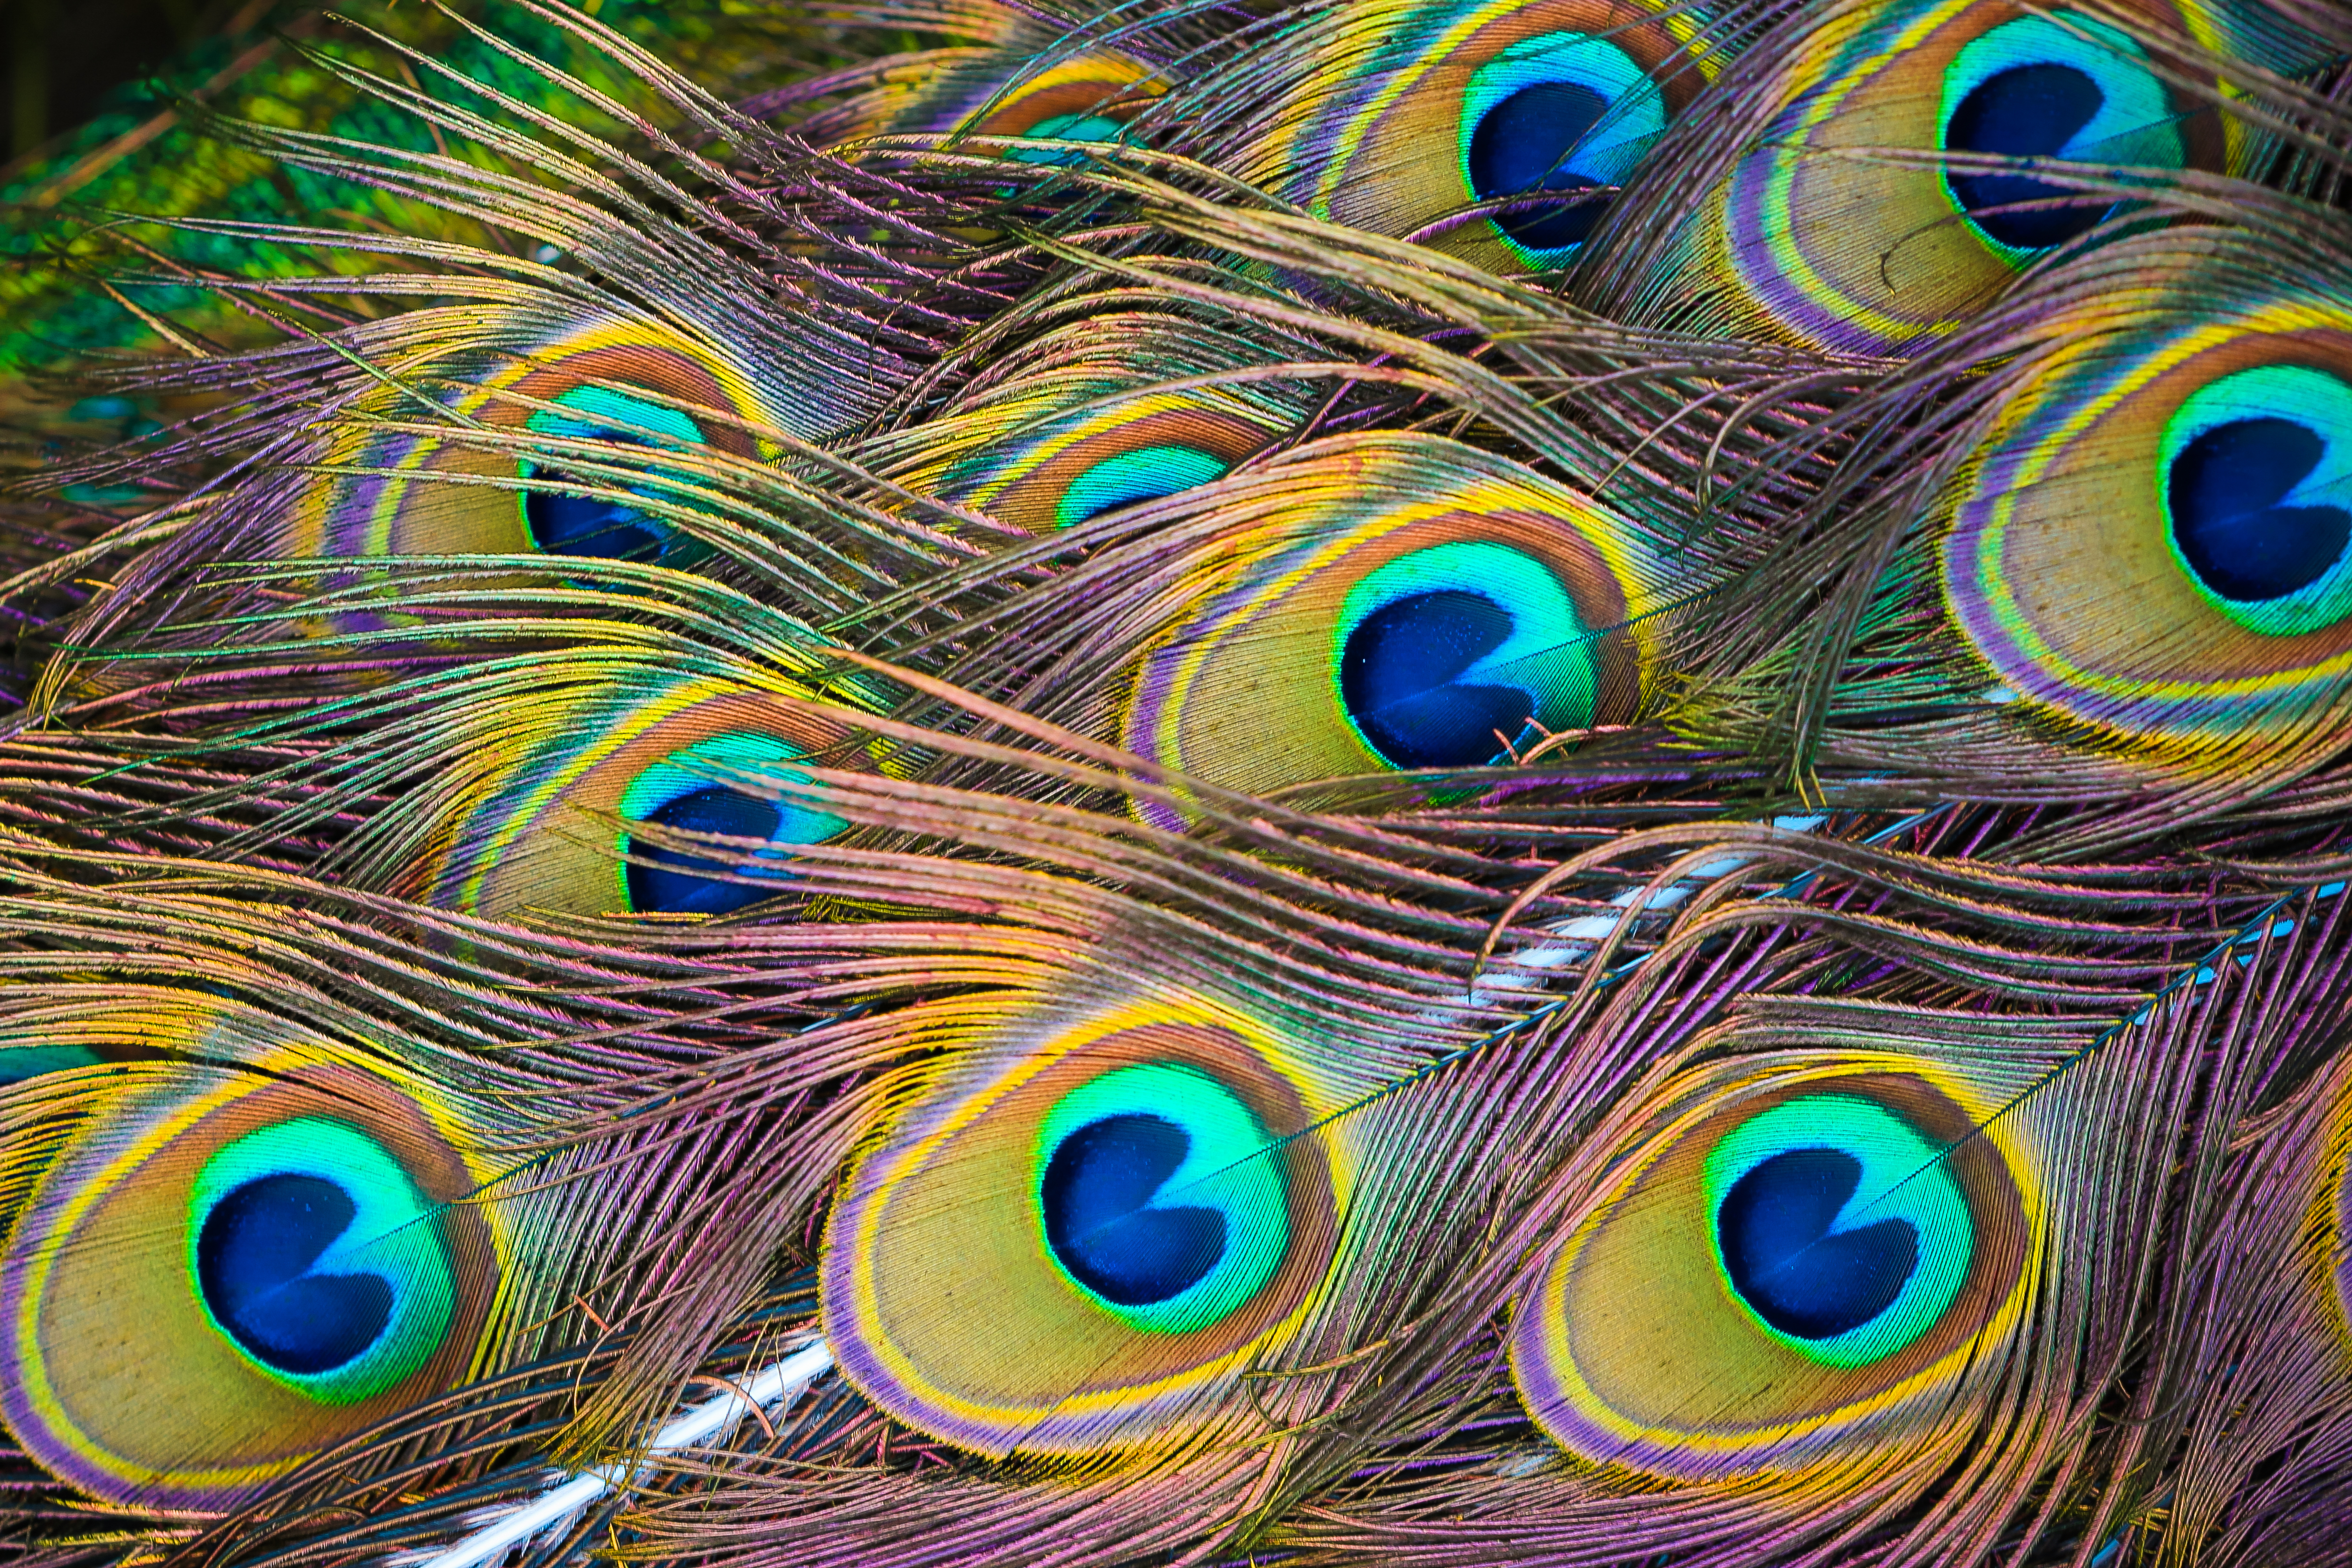 colorful peacock pictures